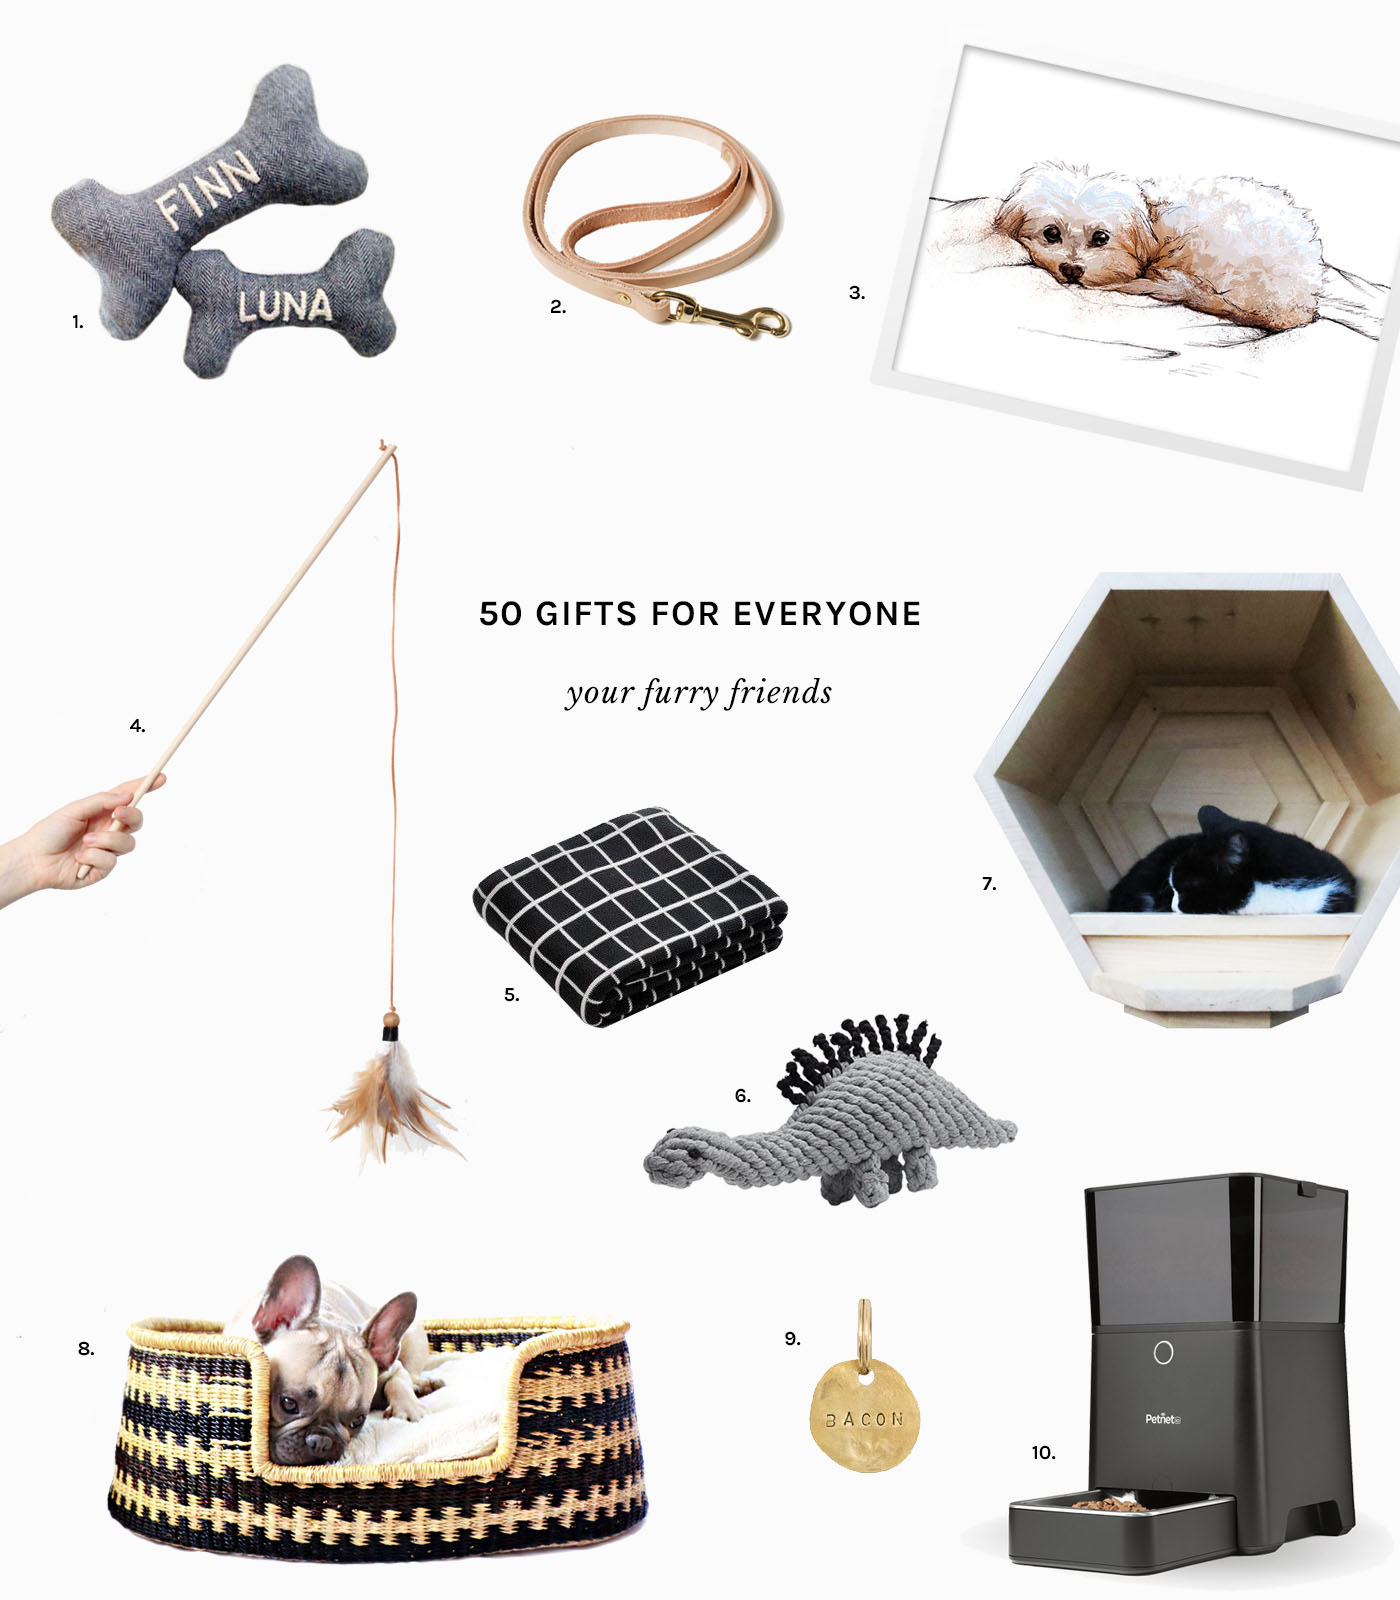 Perfect gifts for stylish and modern pets. Part of a well-curated gift guide for everyone in your life.